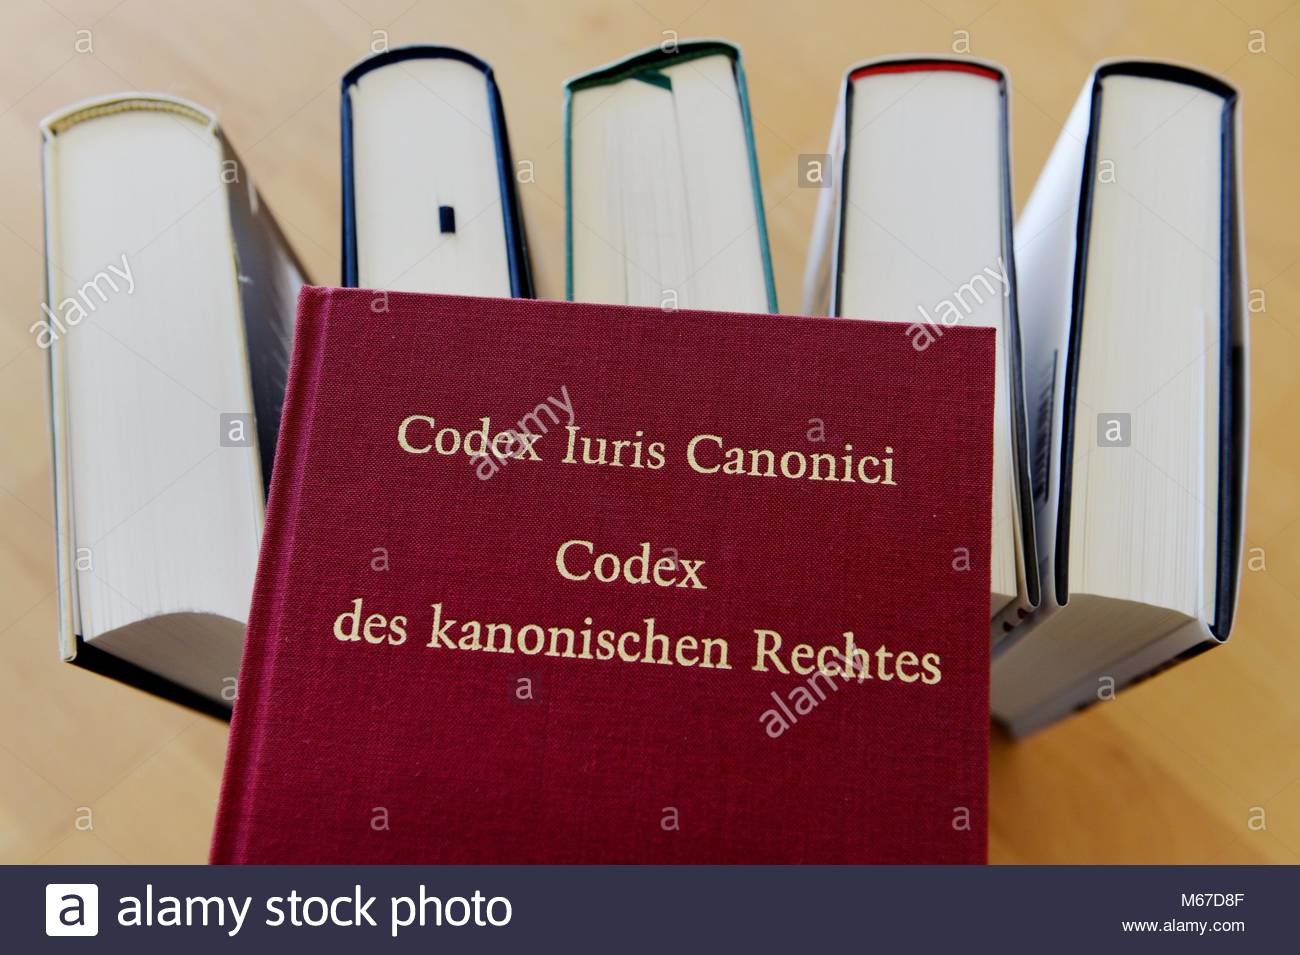 the-book-codex-iuris-canonici-germany-city-of-osterode-28-february-M67D8F